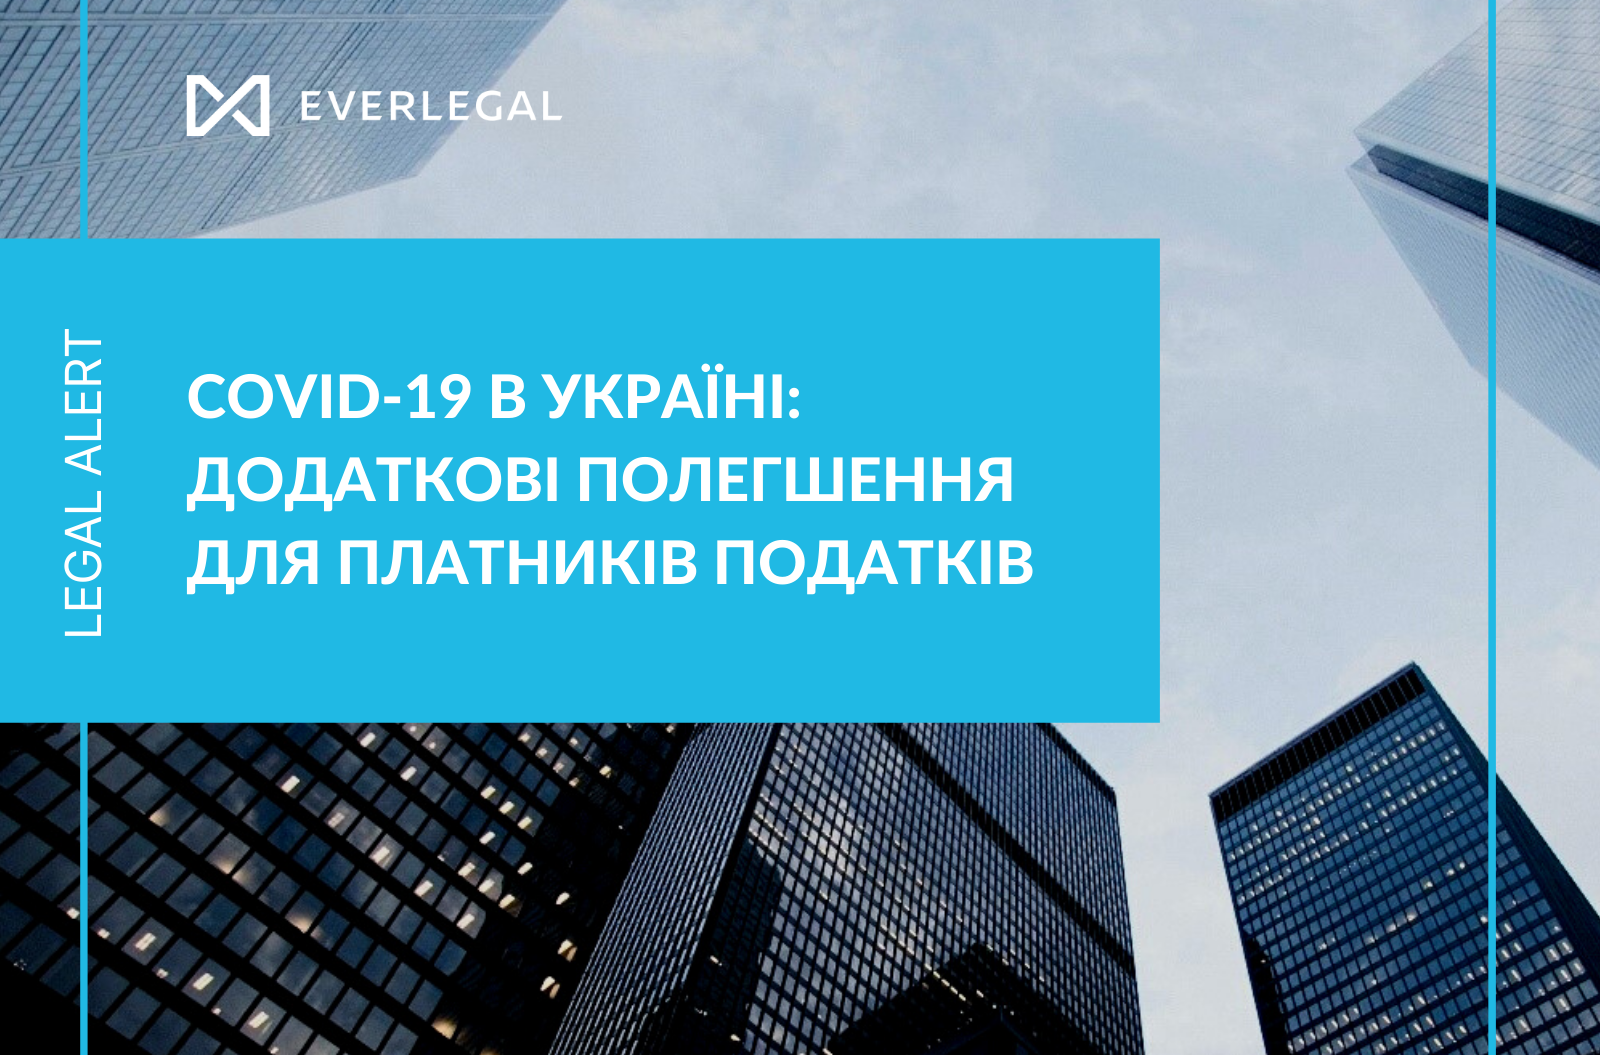 COVID-19 in Ukraine: additional benefits for tax payers